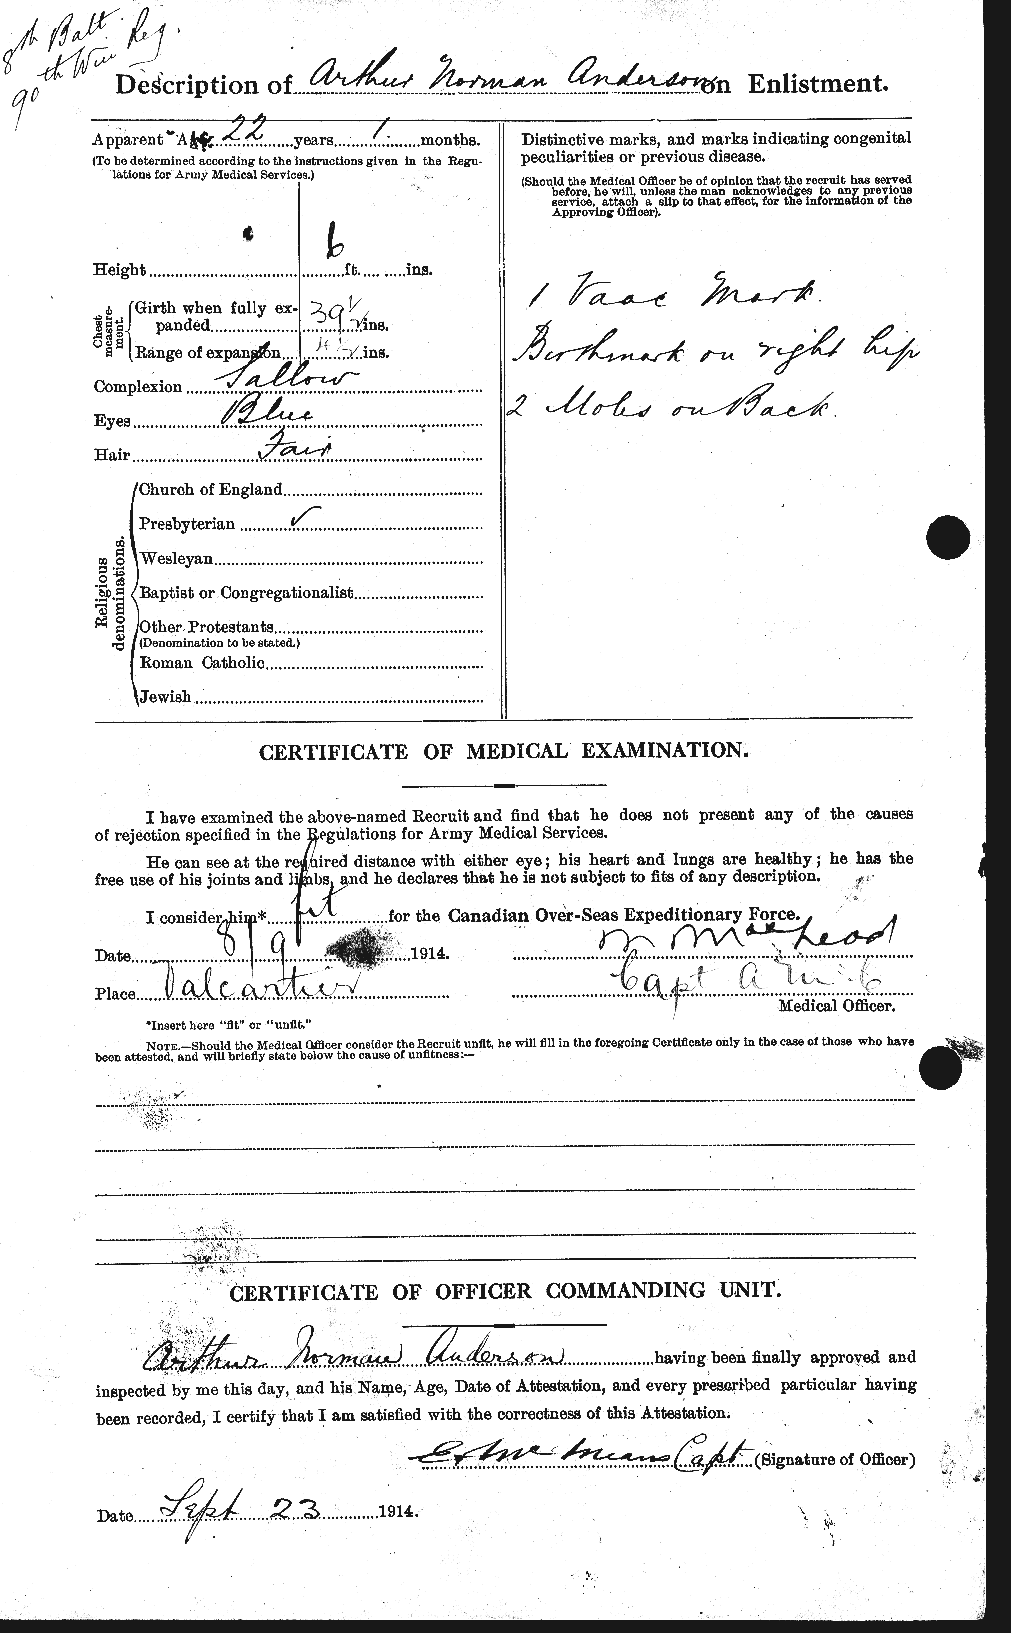 Personnel Records of the First World War - CEF 209351b